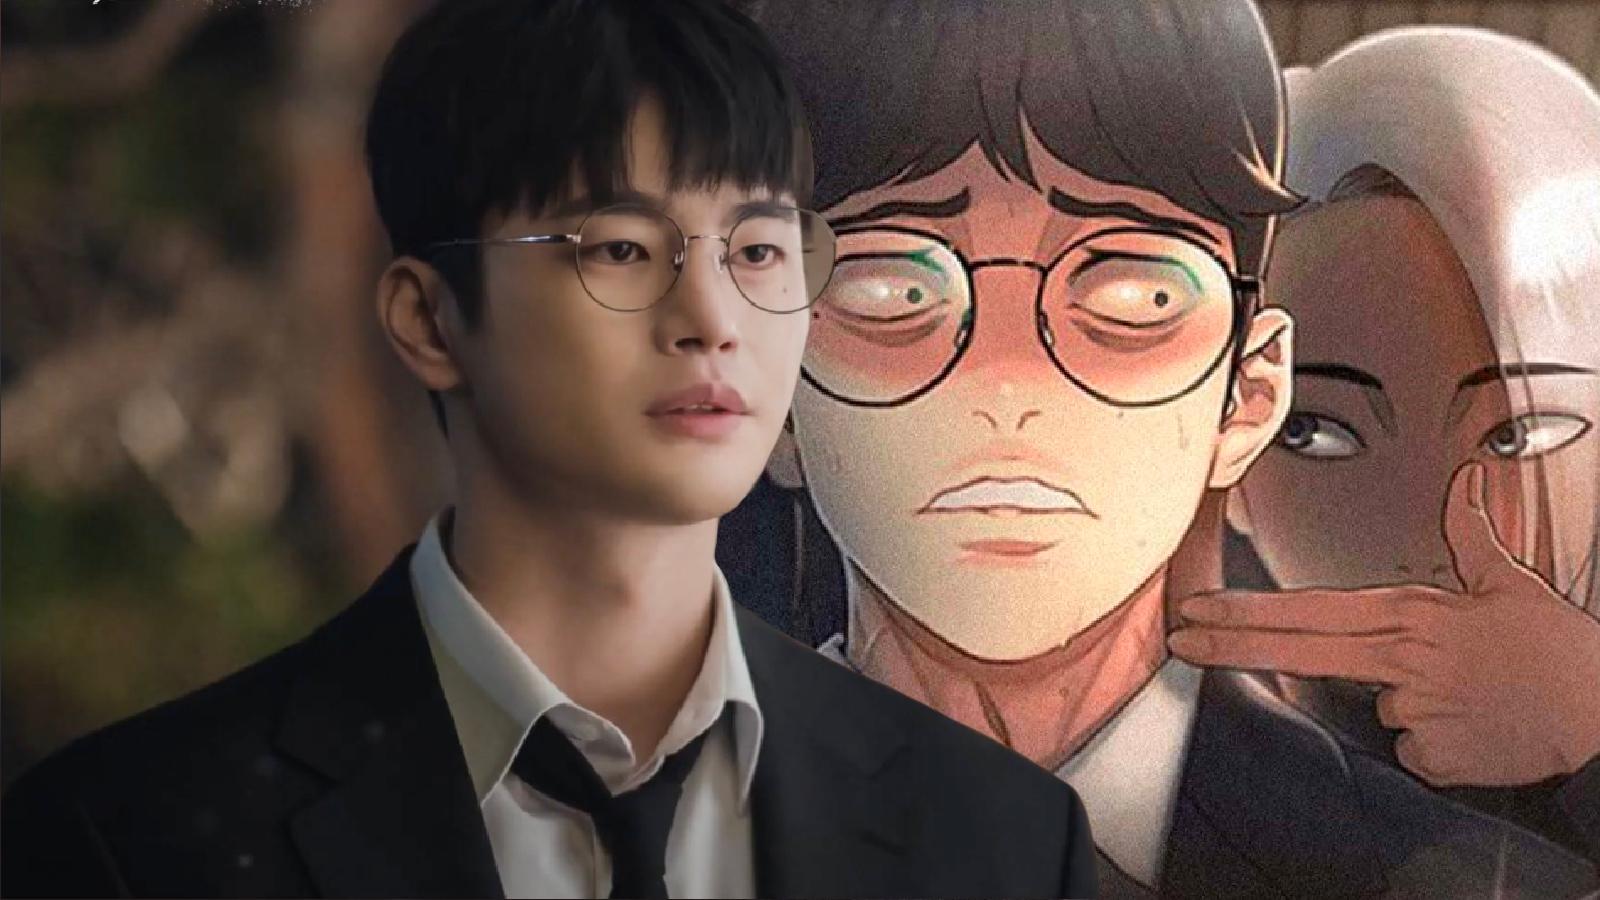 Seo In-guk for Death's Game as Choi Yi-jae